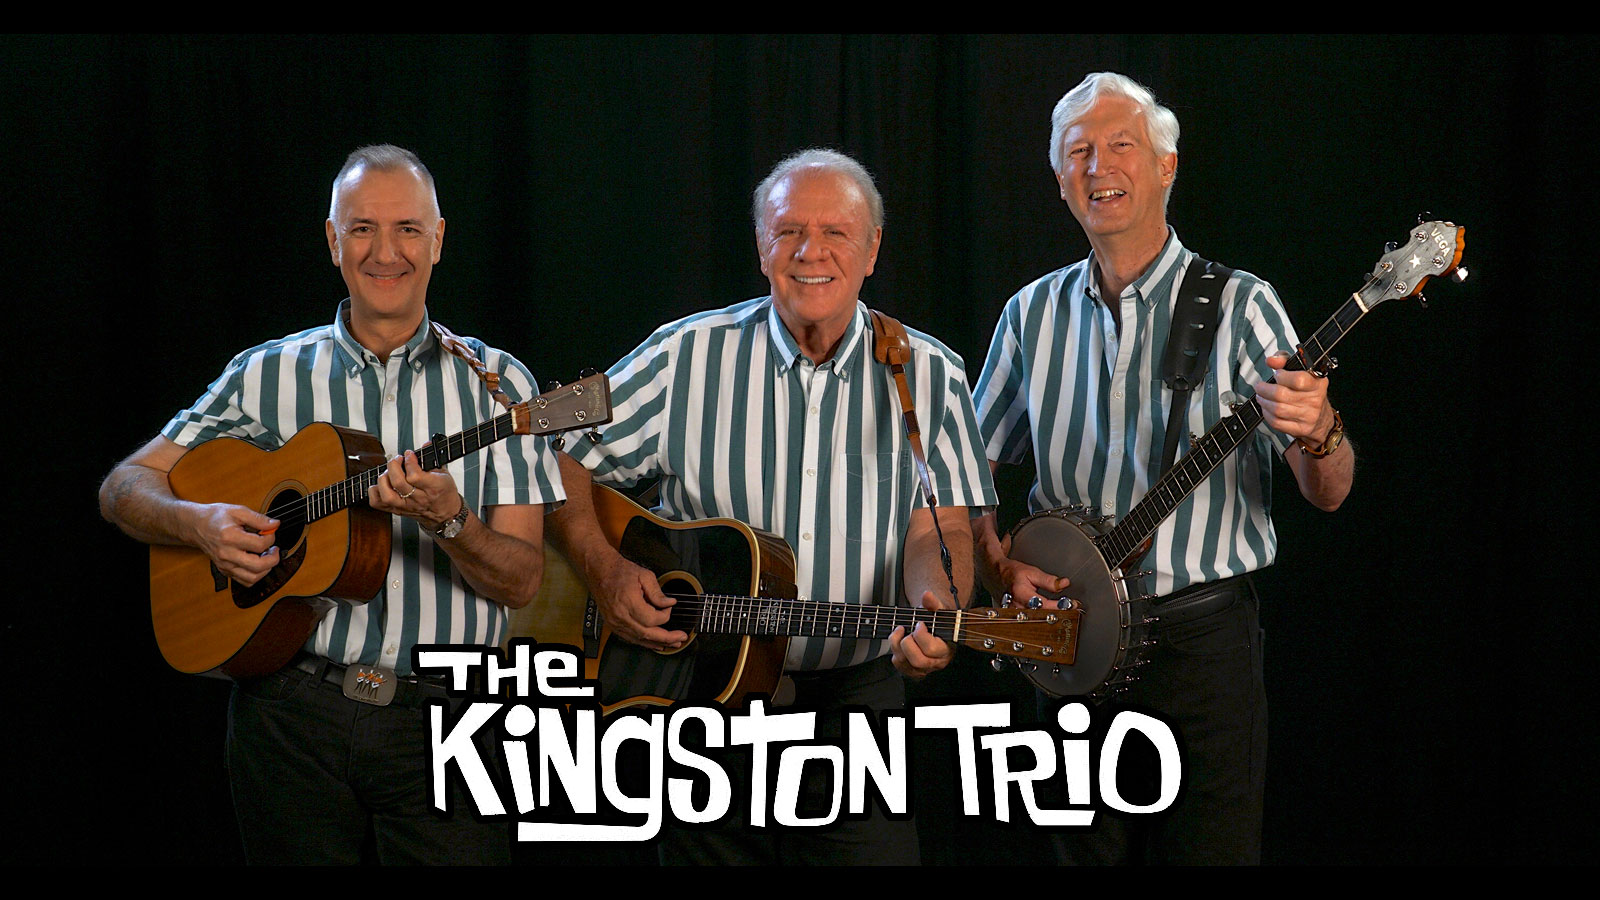 Members of The Kingston Trio posed with instruments.